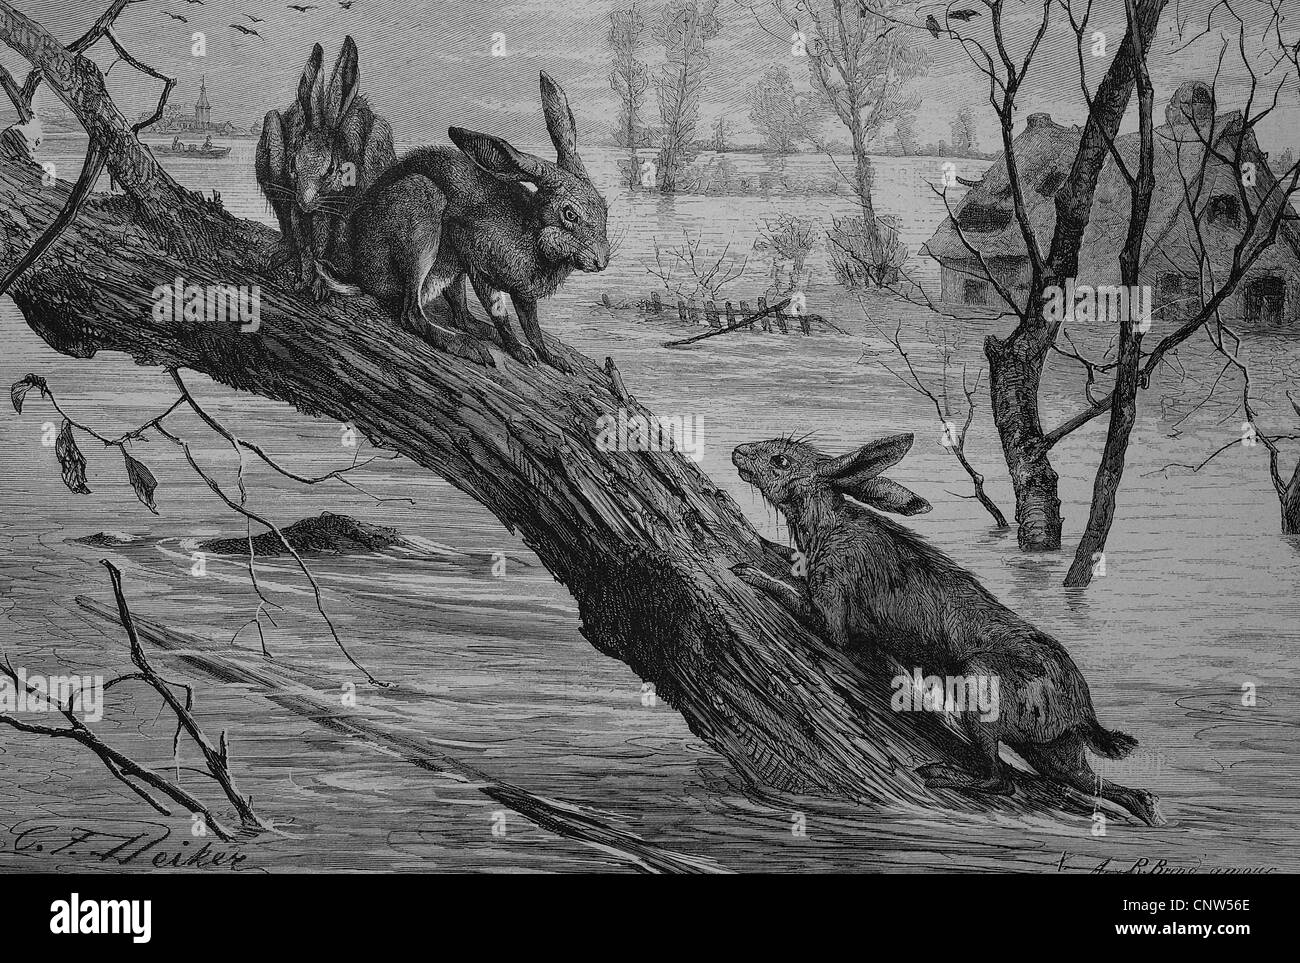 Hares seeking refuge on a tree trunk during a flood, historical engraving, 1880 Stock Photo